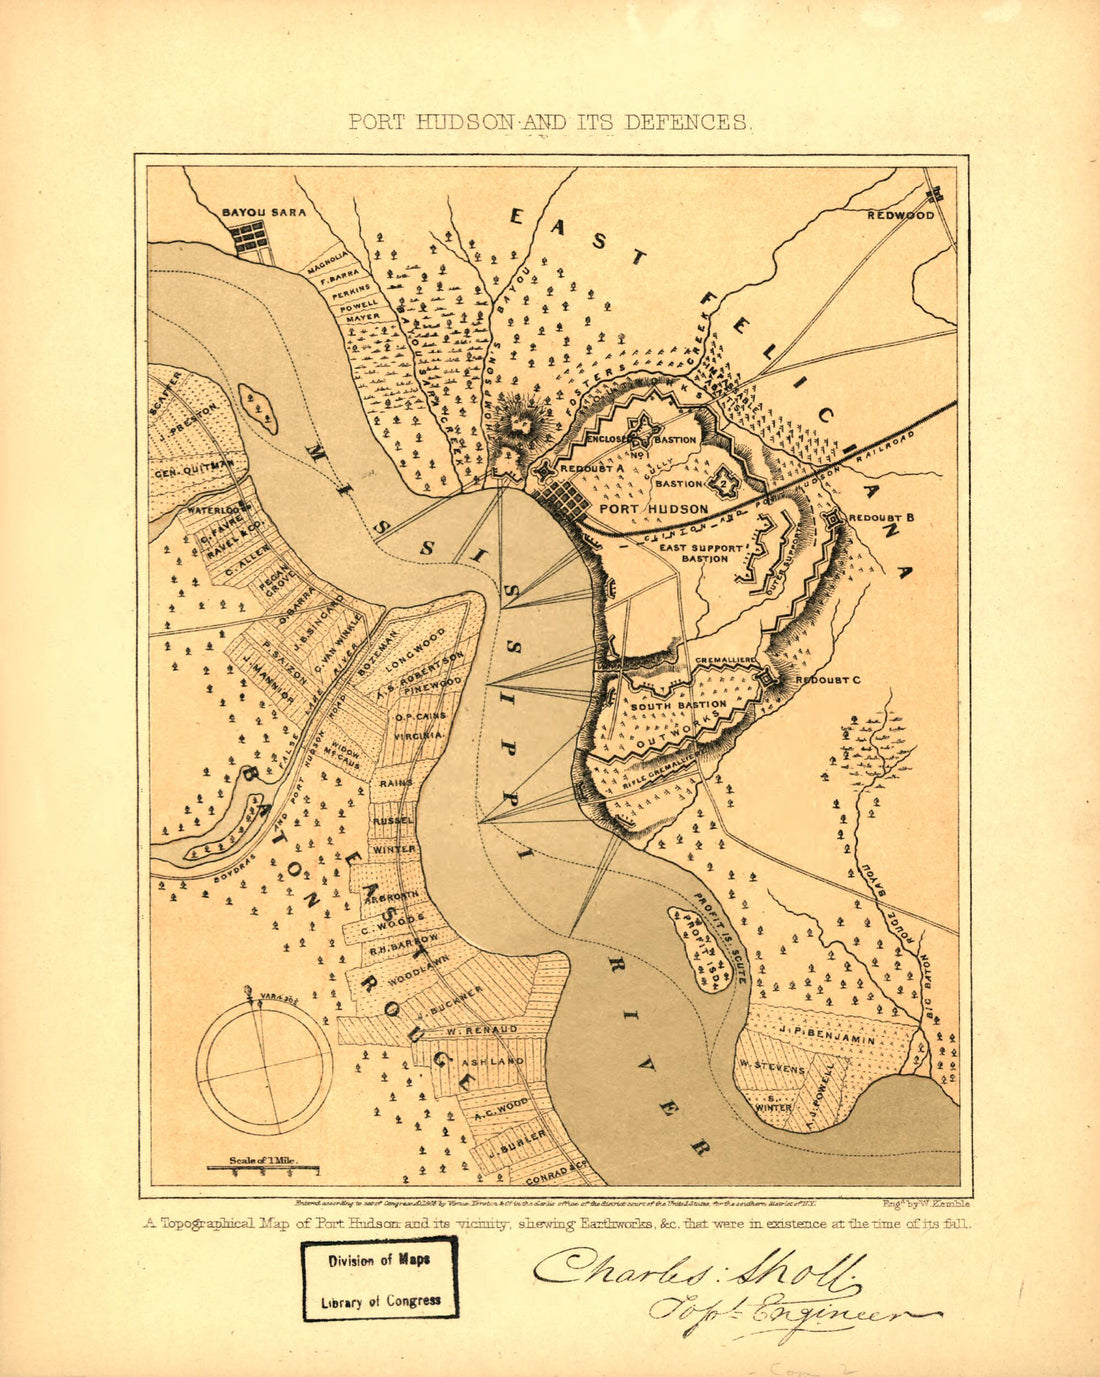 This old map of Port Hudson and Its Defences from 1863 was created by Charles Sholl in 1863